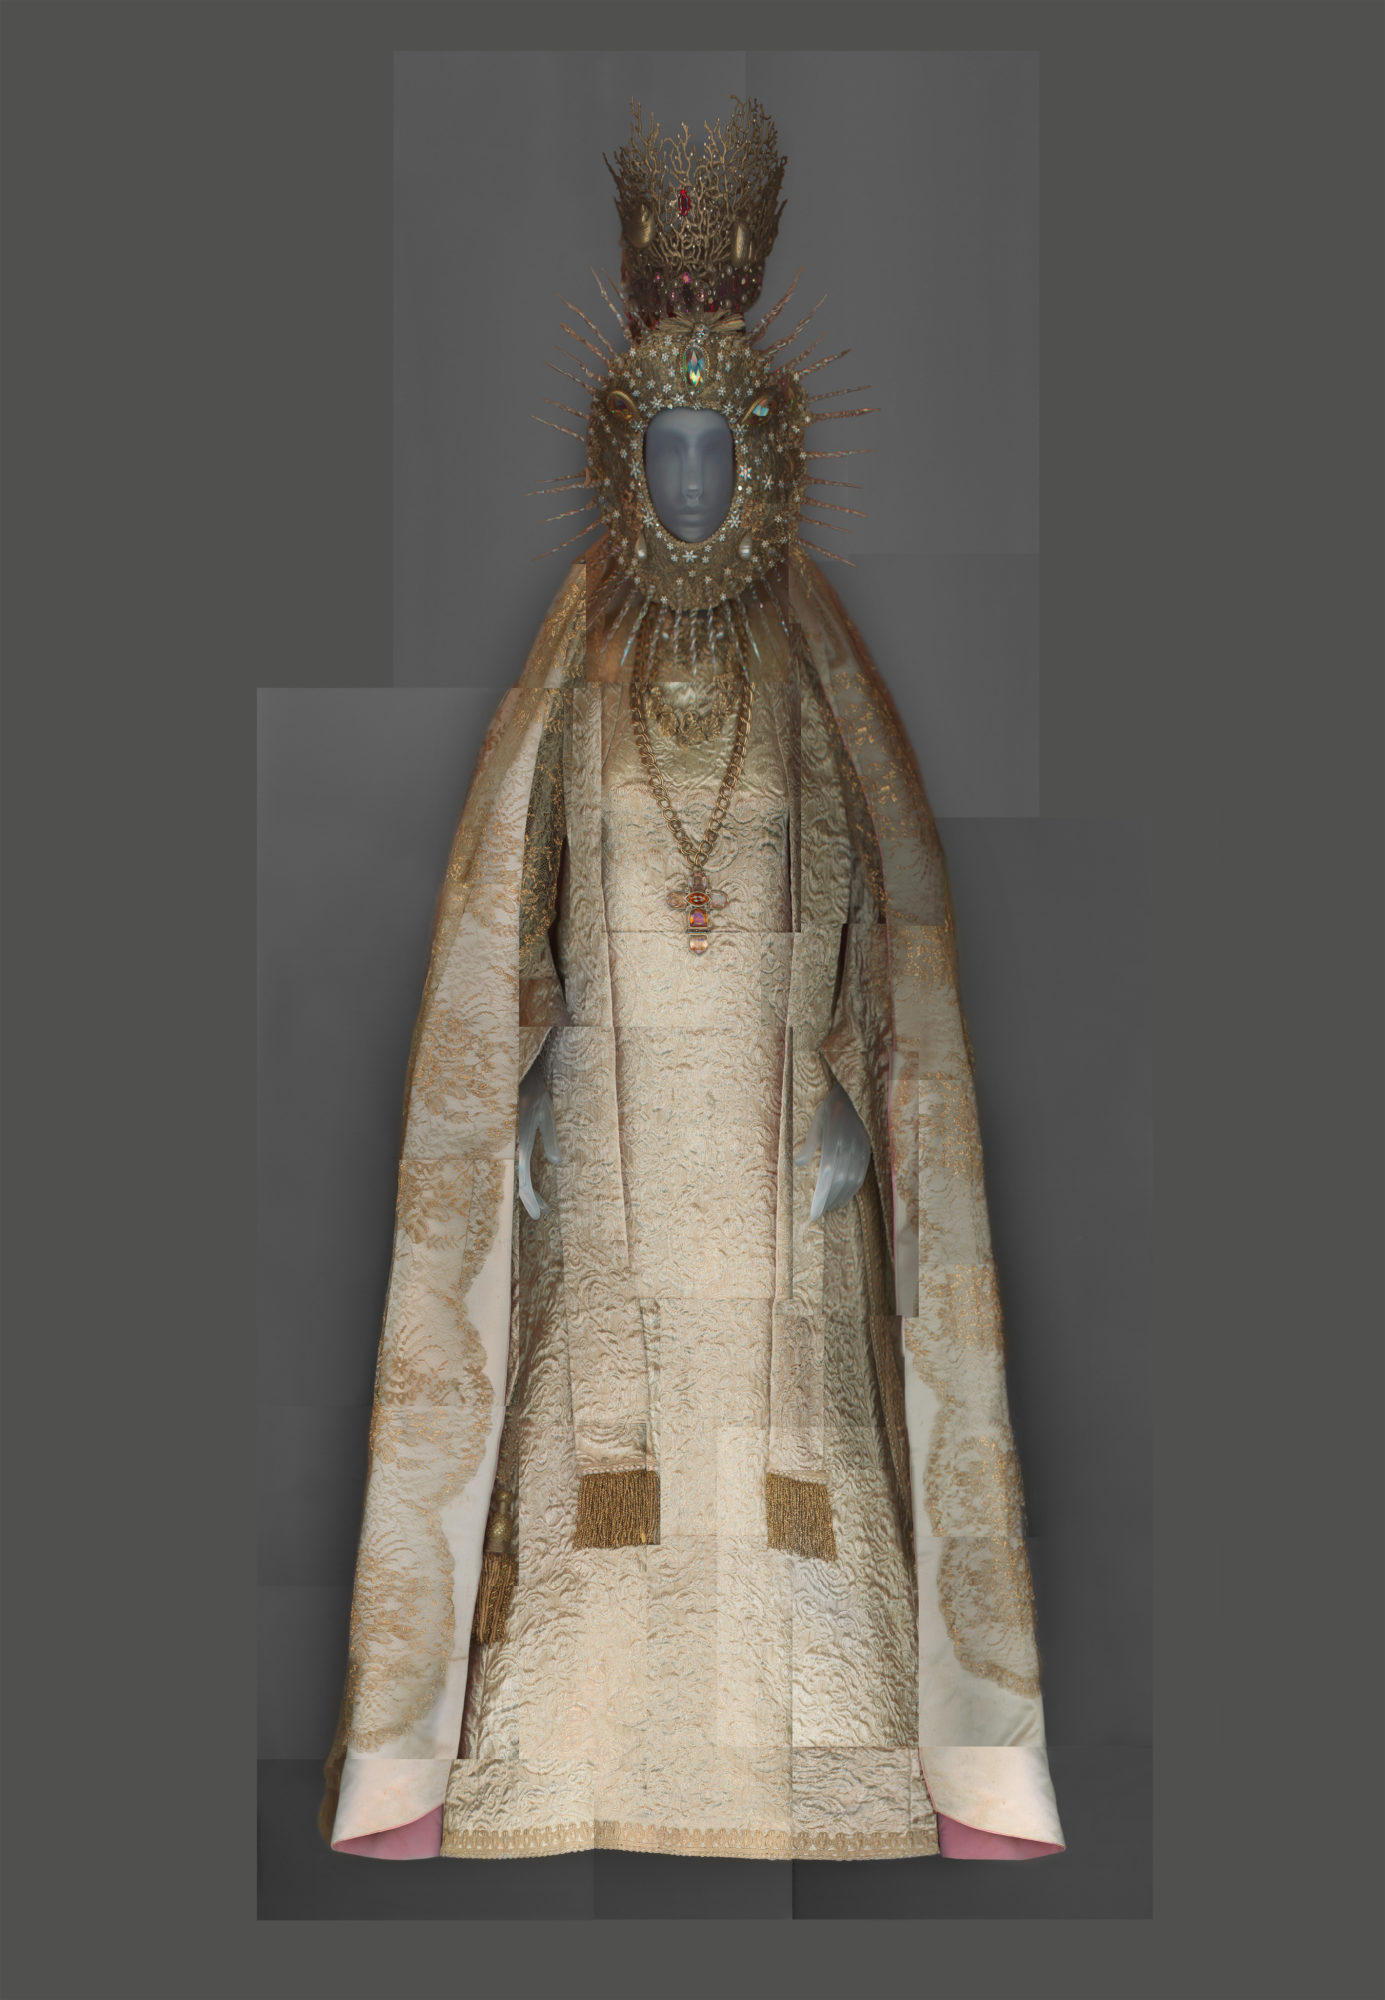 gold, shiny gown with tassels, a robe, a large golden cross necklace and headwear with golden spokes coming out from around the face.